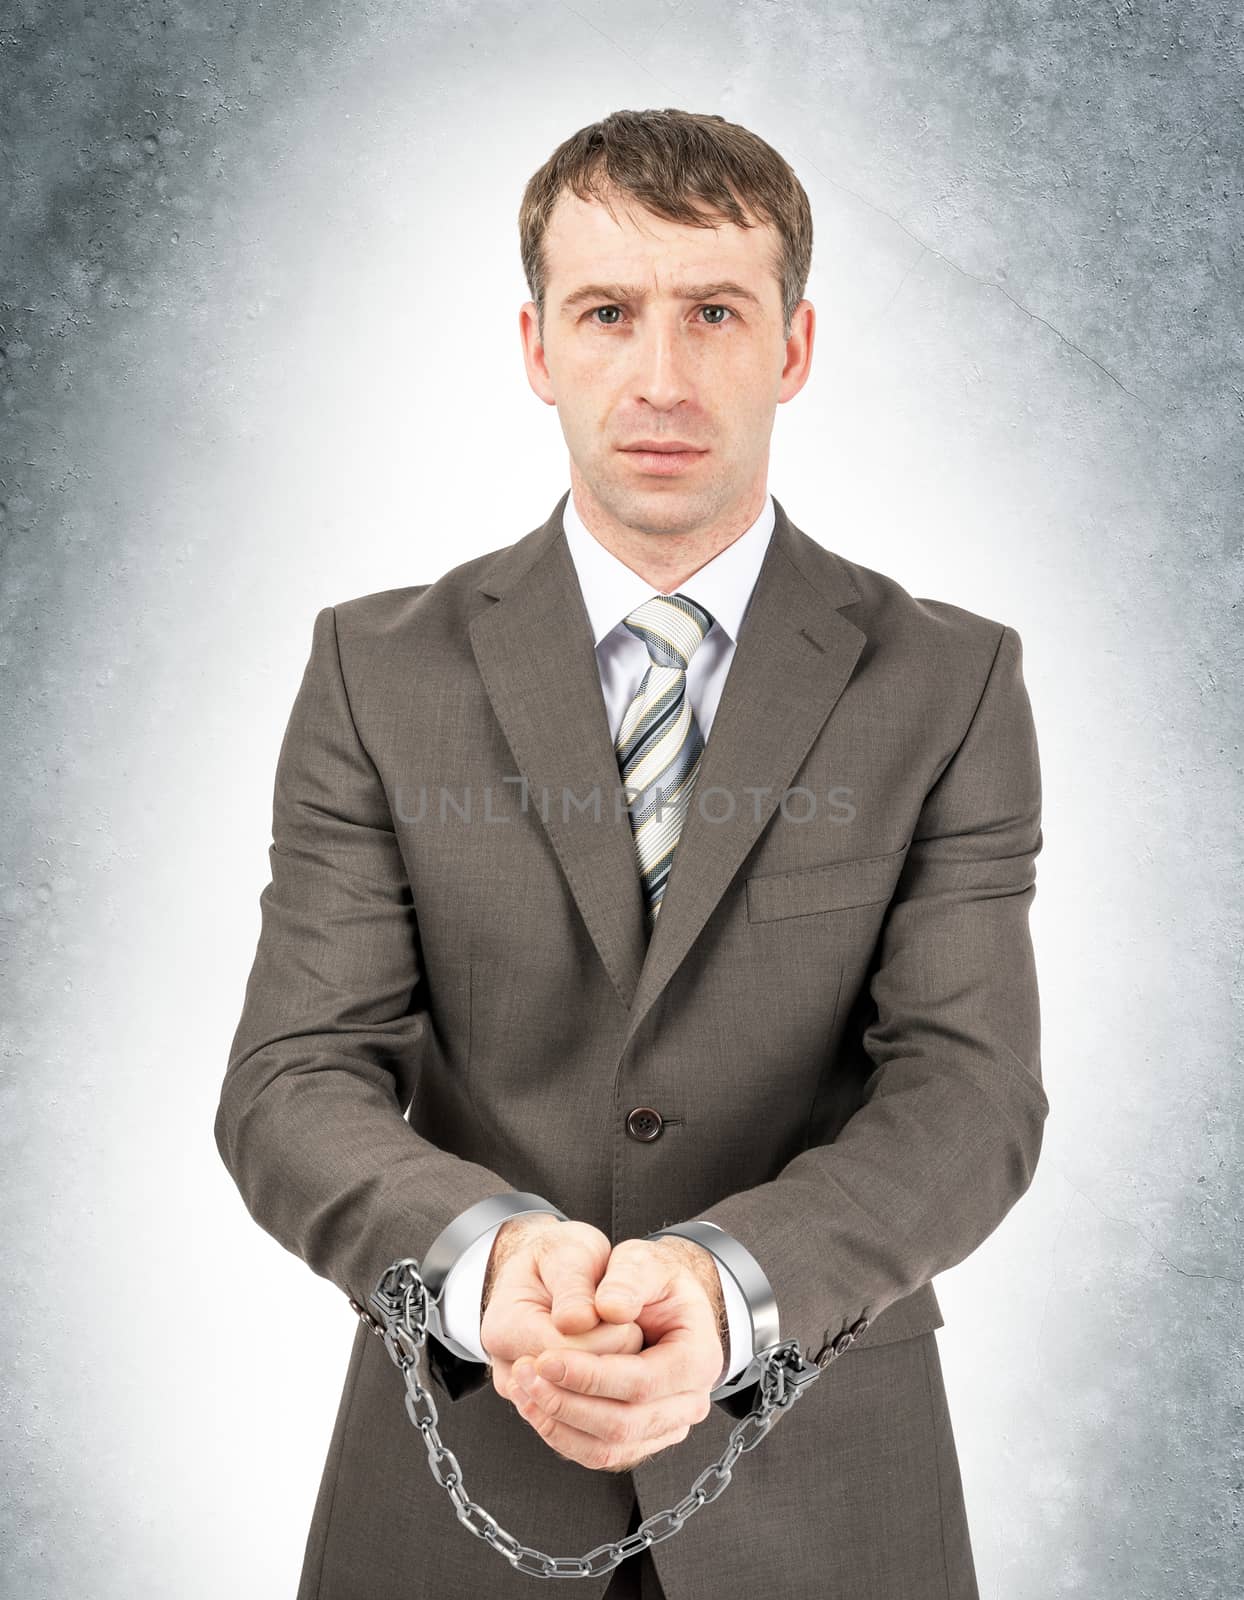 Serious businessman in cuffs on grey wall background